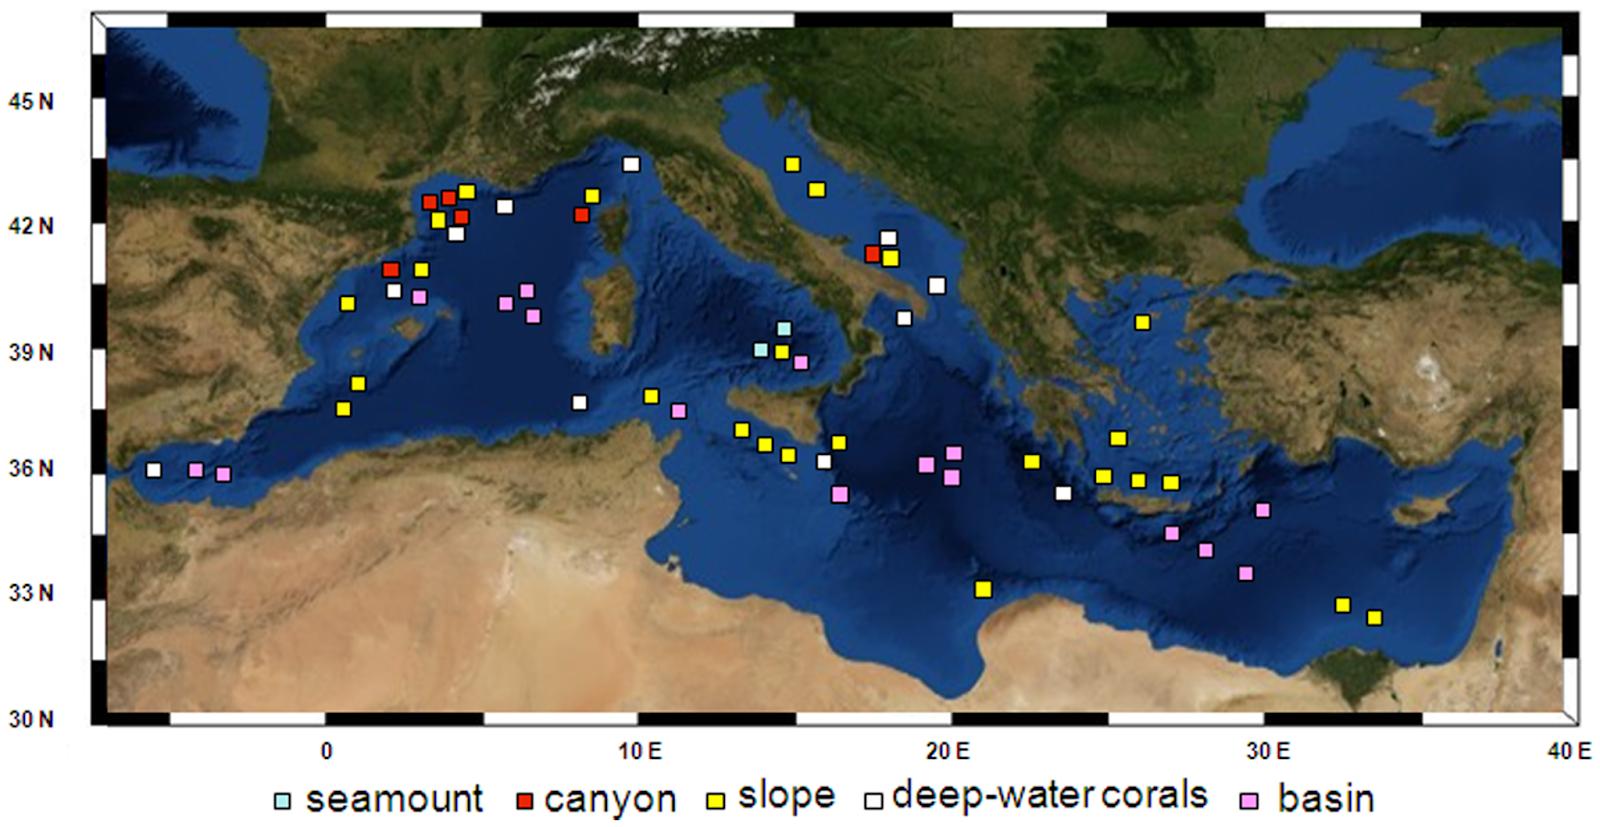 A map of the Mediterranean basin includes features of seamounts, canyons, slopes, deep-water corals, and basins.